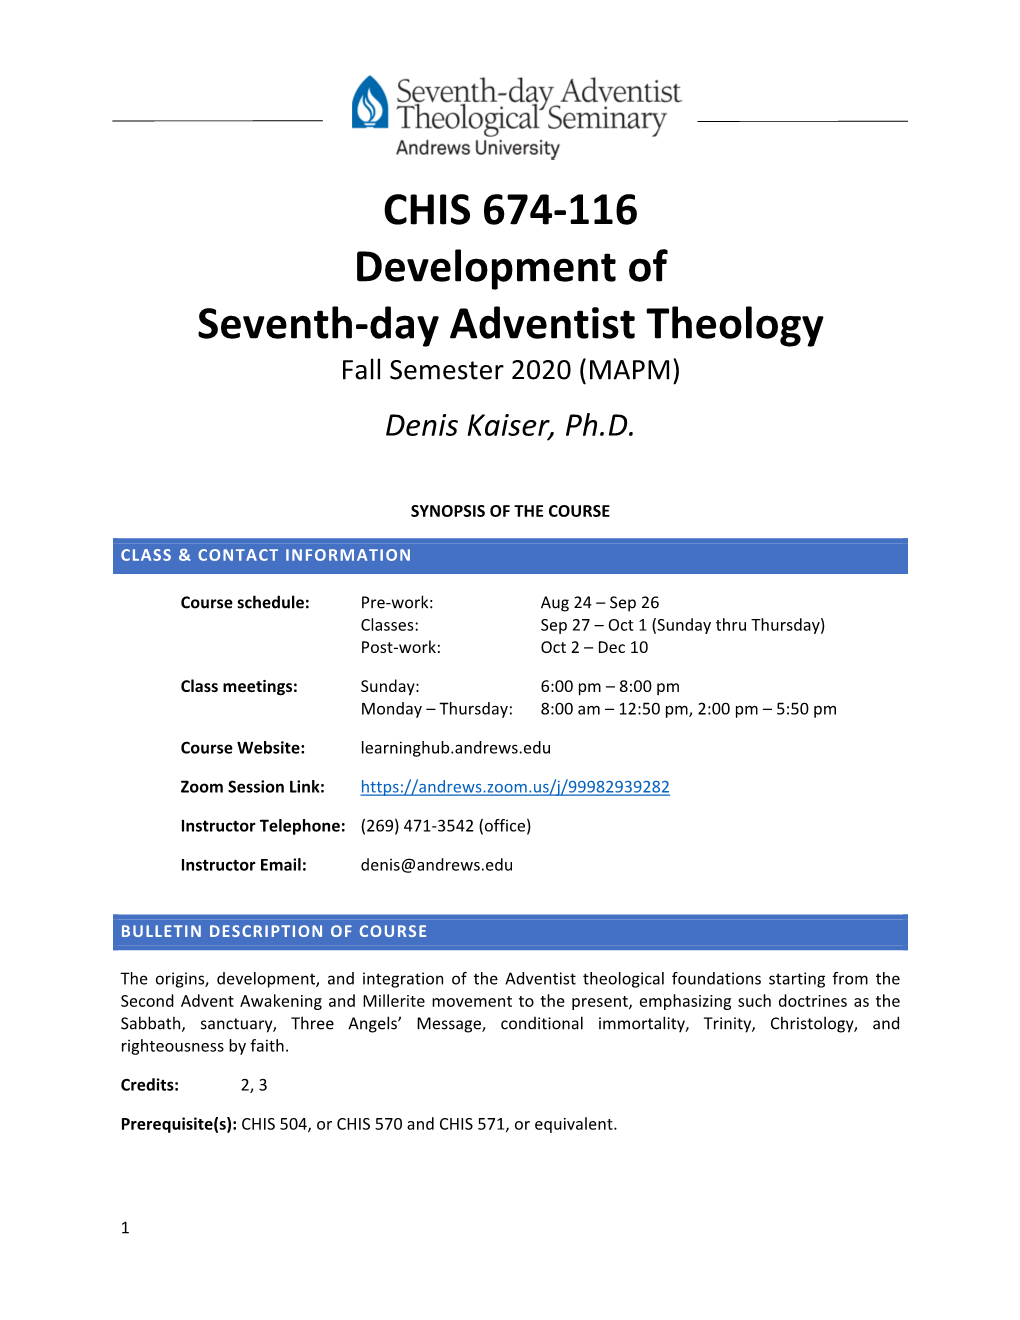 CHIS 674-116 Development of Seventh-Day Adventist Theology